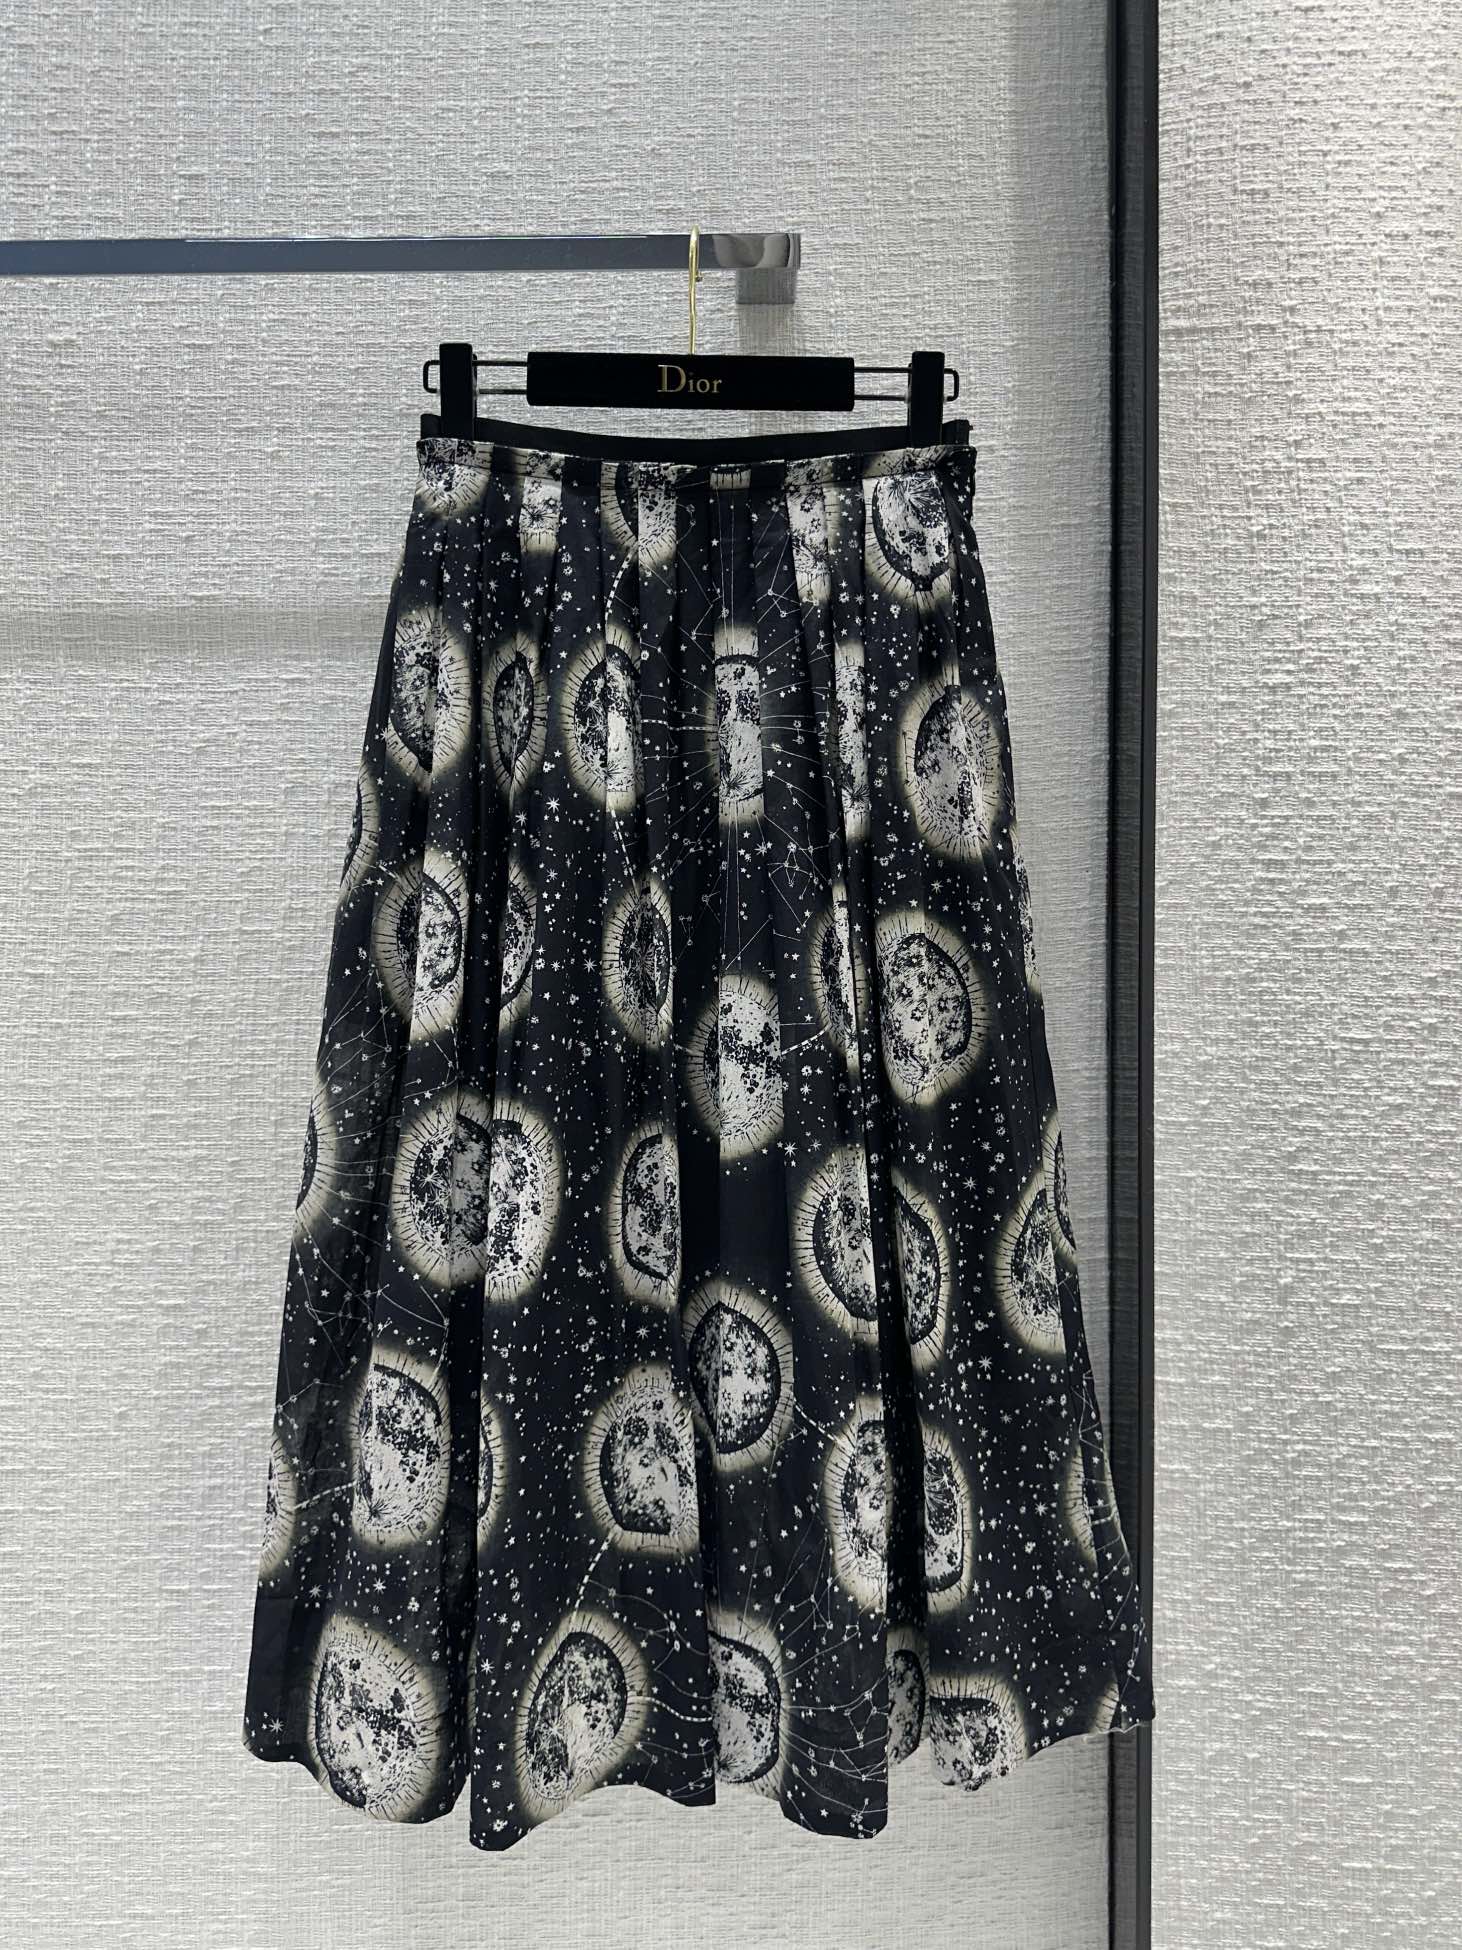 Dior Clothing Skirts Black Printing Cotton Spring Collection